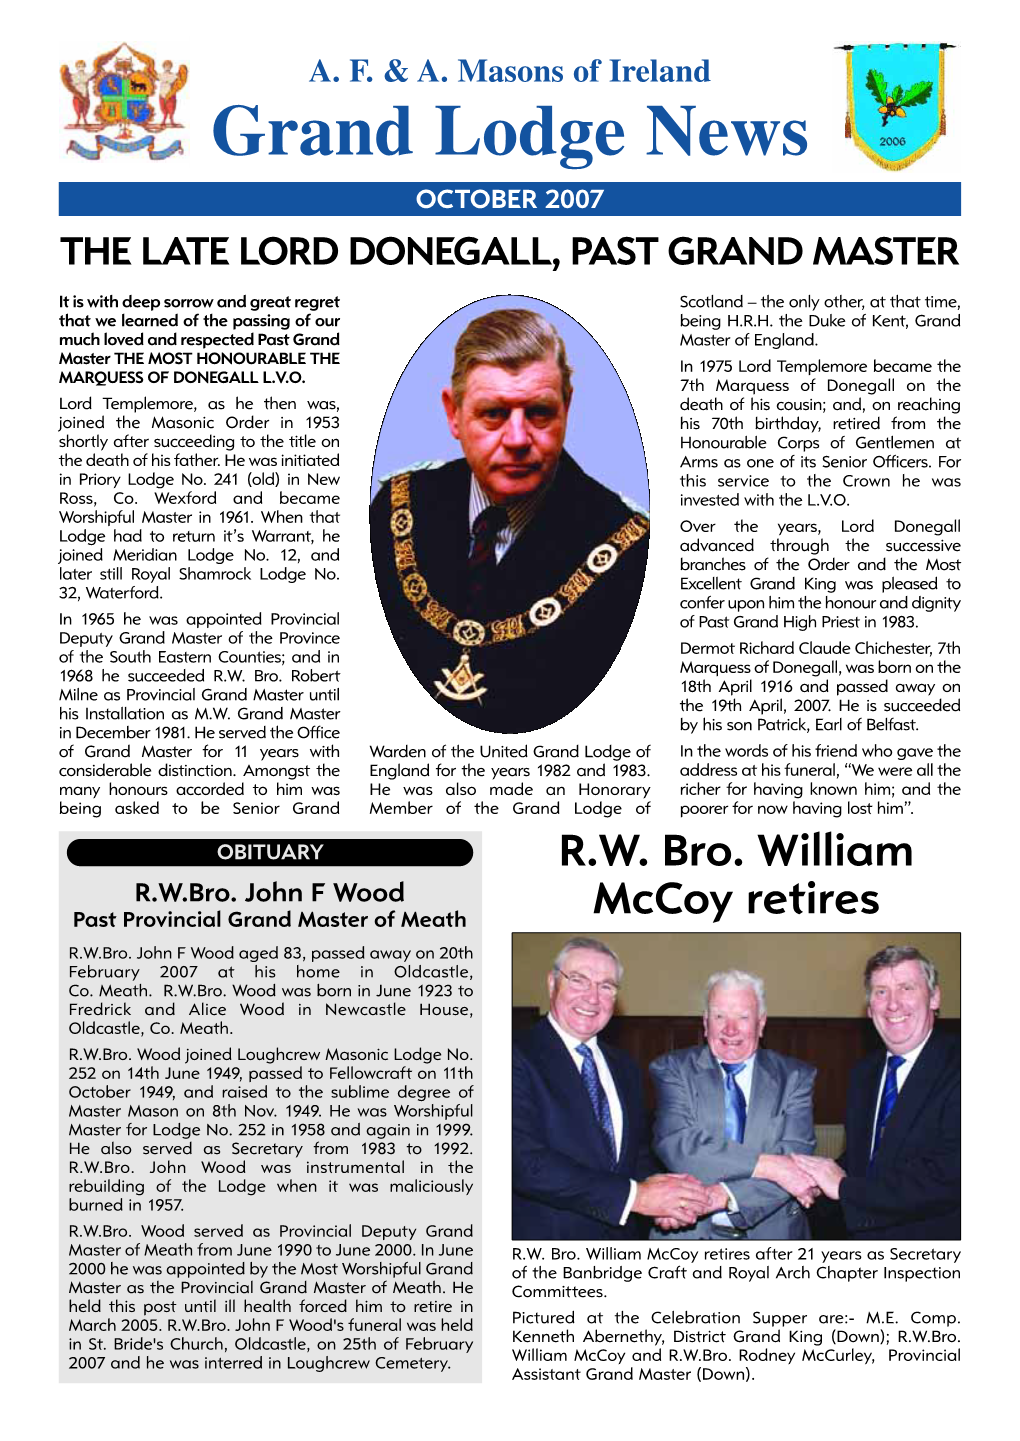 Grand Lodge News OCTOBER 2007 the LATE LORD DONEGALL, PAST GRAND MASTER